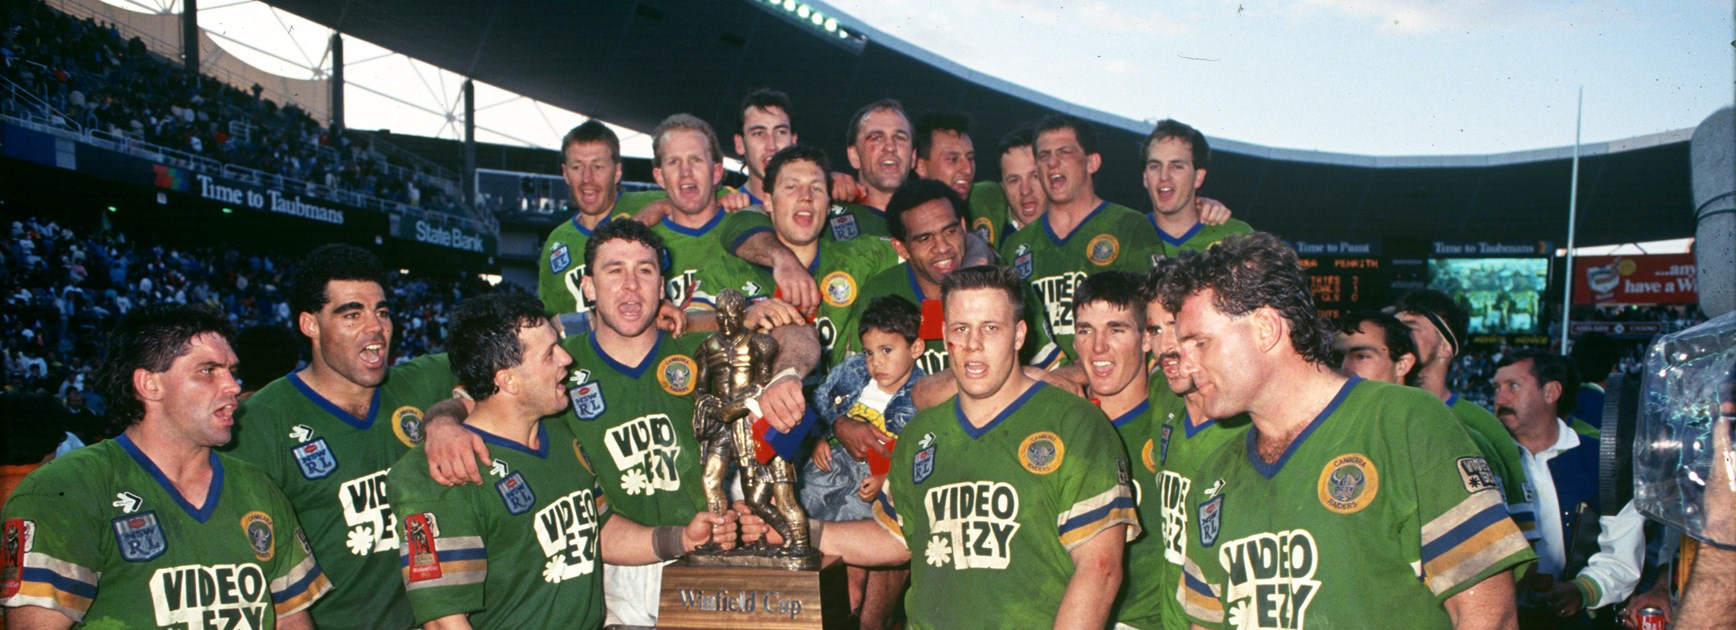 1990 grand final rewind: Canberra's 'forgotten' win over Penrith